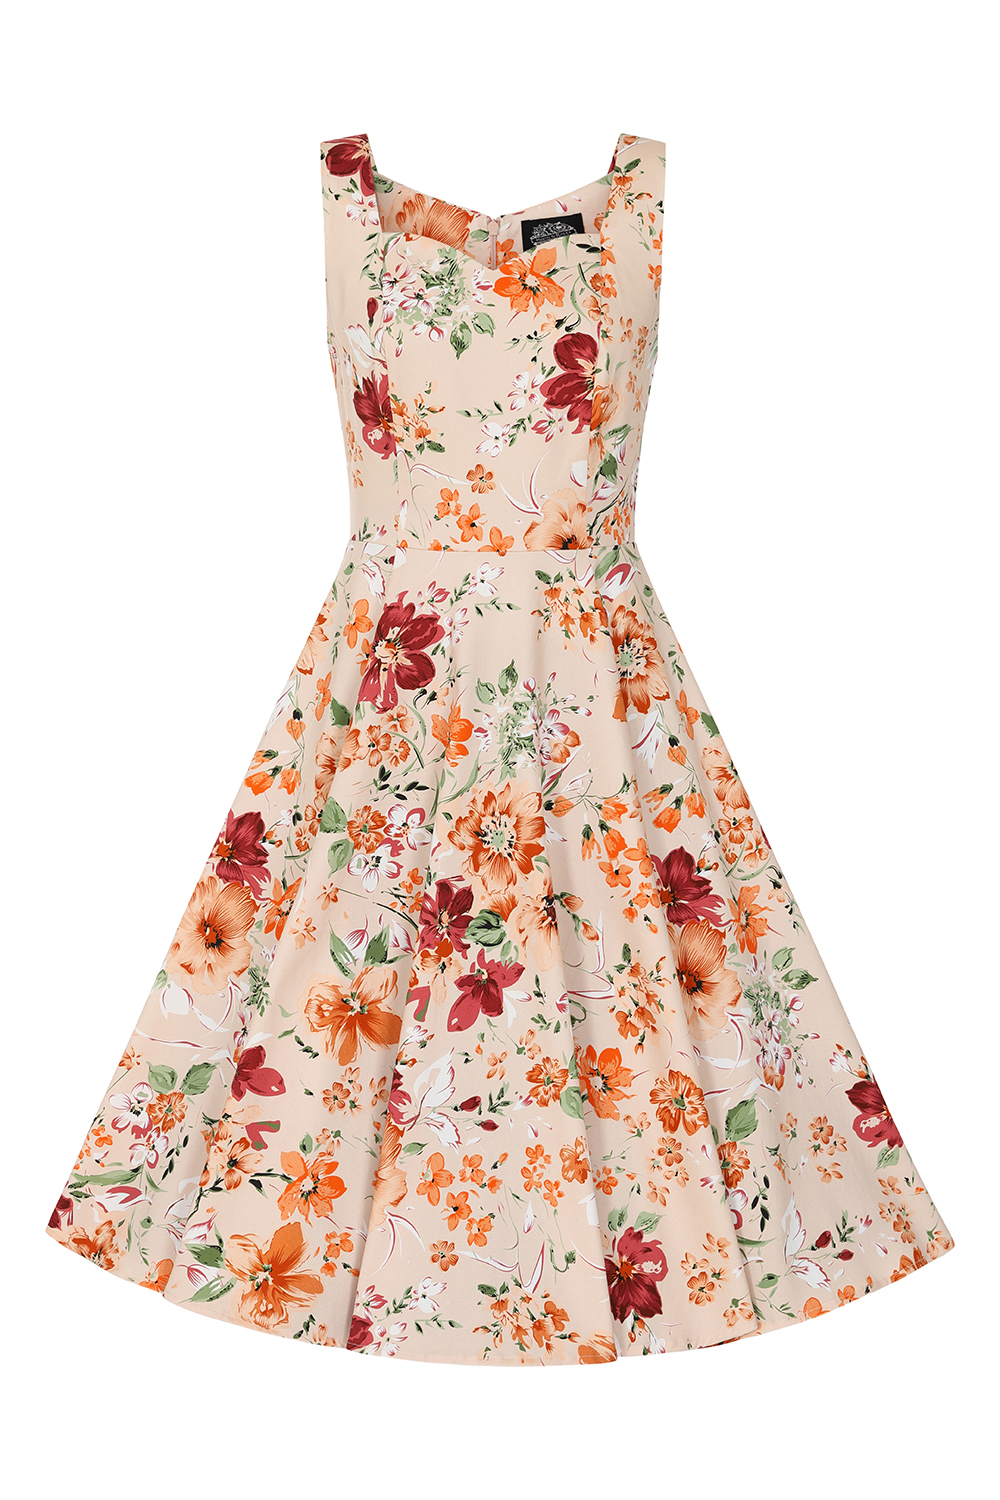 Ariana Floral Swing Dress - Hearts & Roses London